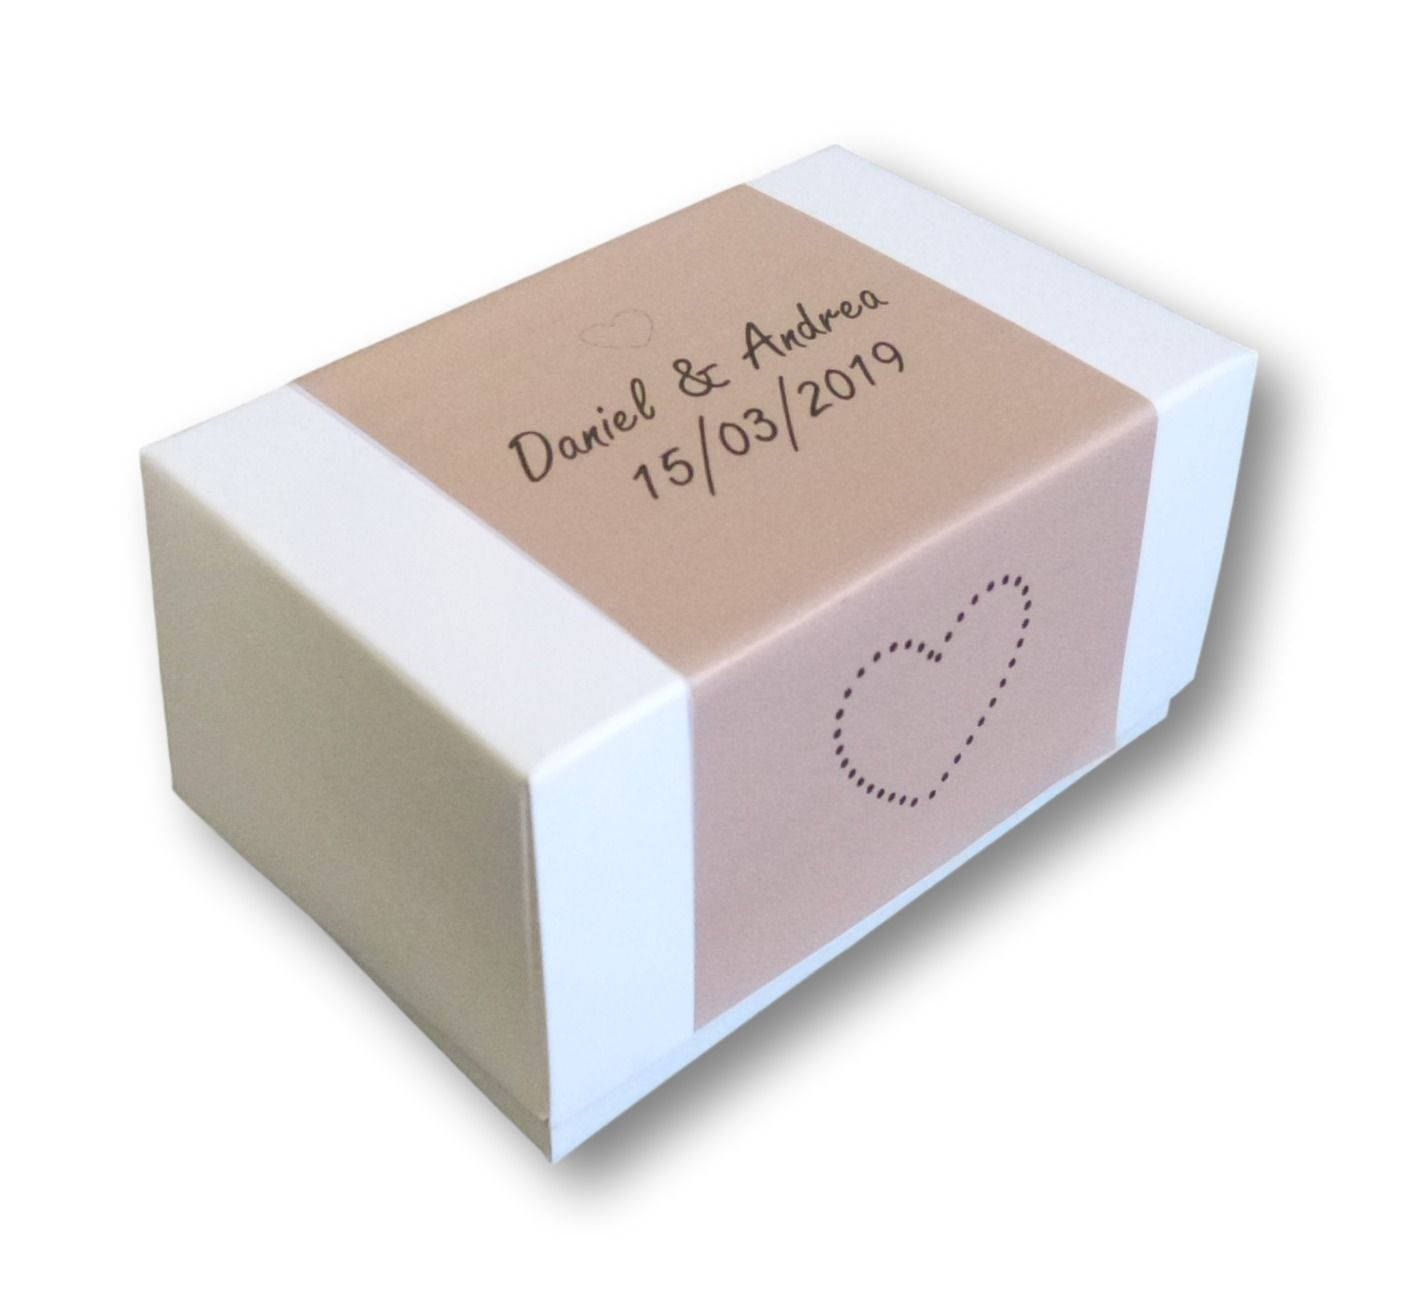 10 x personalised cake boxes colour choice party wedding birthday christening favour